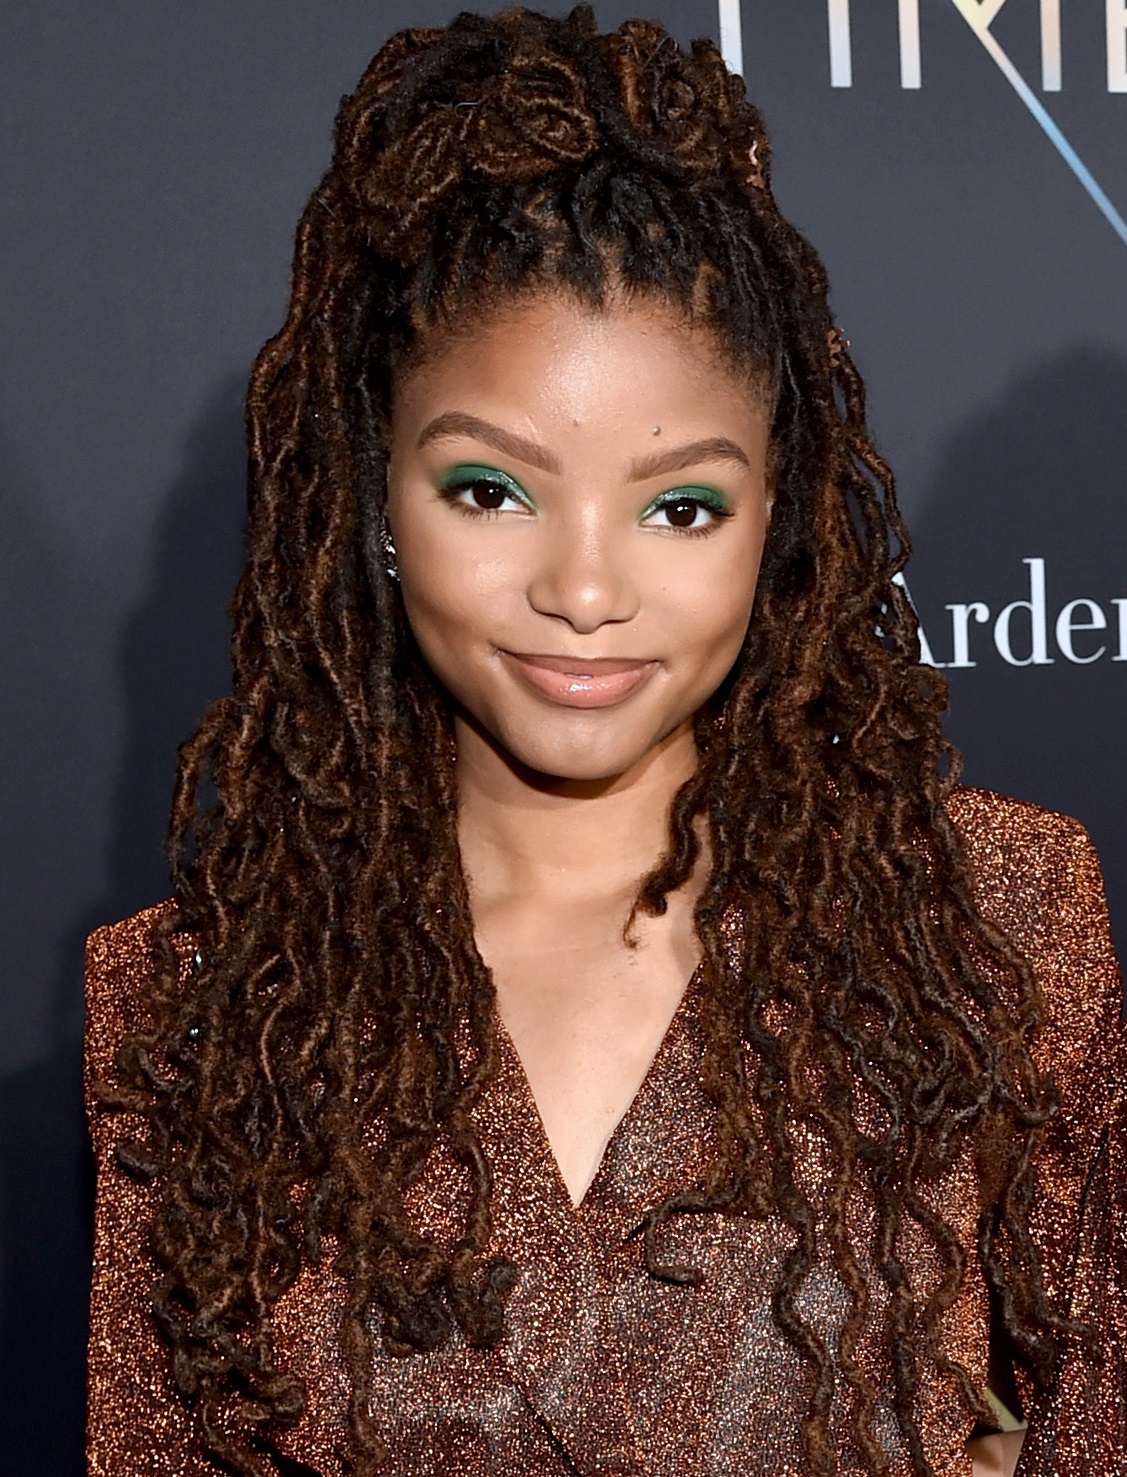 Halle Bailey Cast As Ariel In Disney’s Upcoming Live-Action Reimagining Of The Little Mermaid